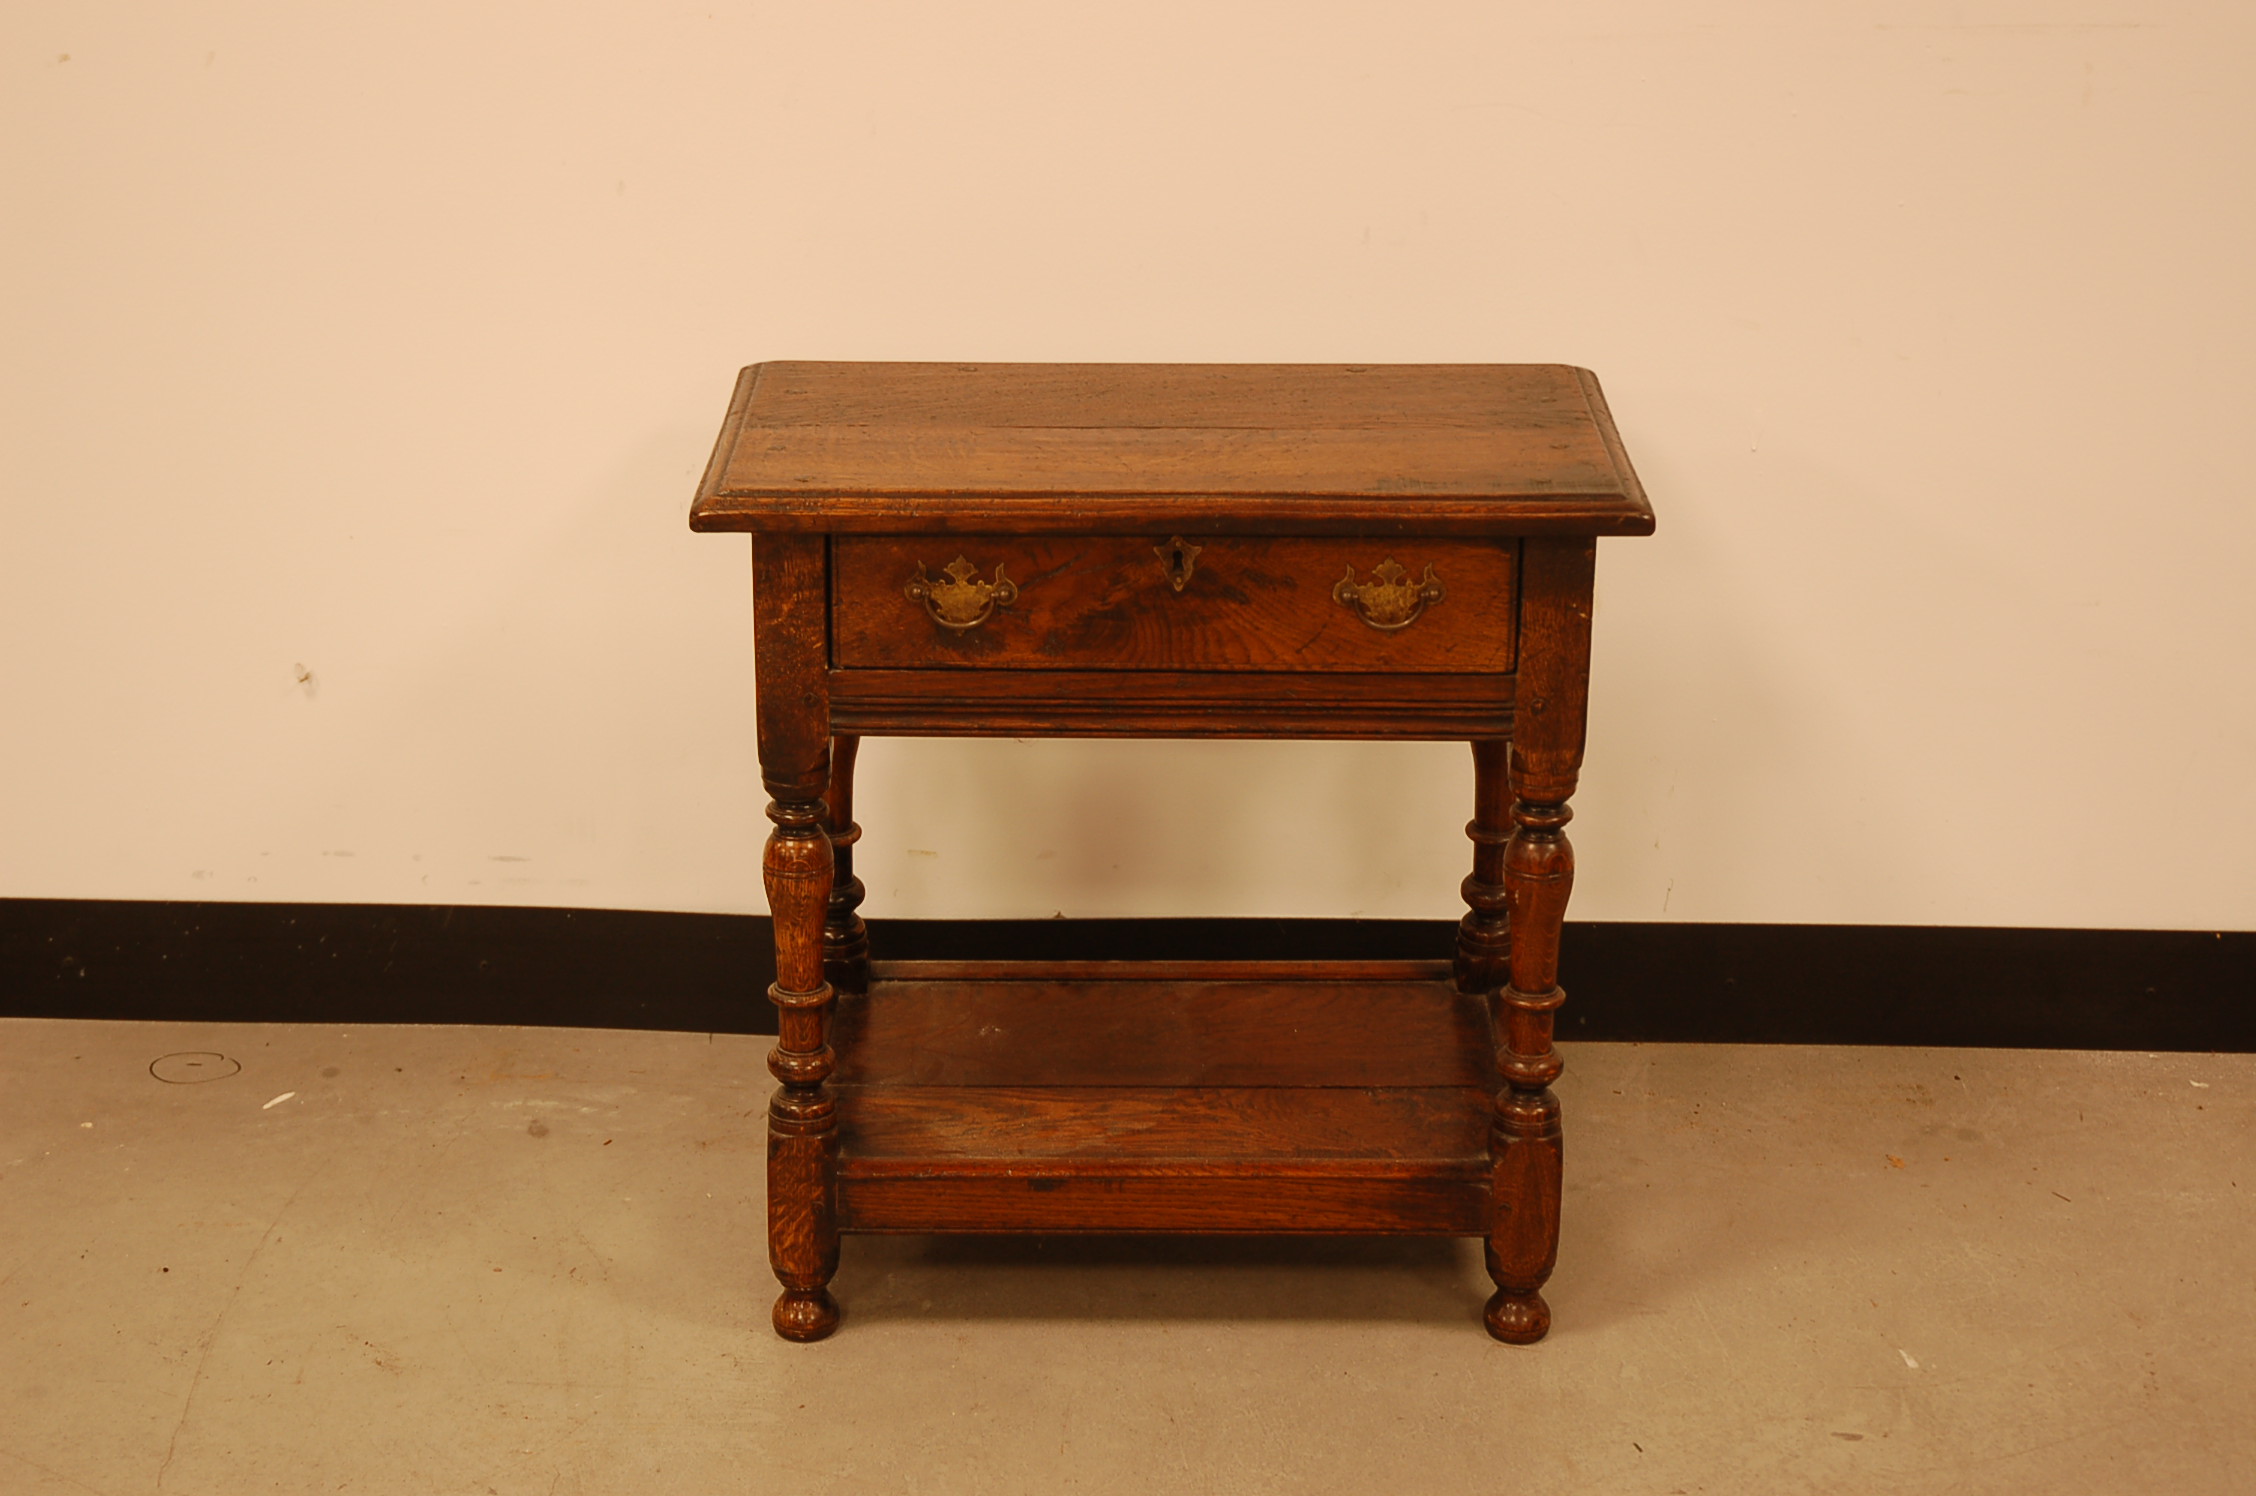 A 19th century and later small table or stool, 56cm wide, drawer liner appears to have been replaced